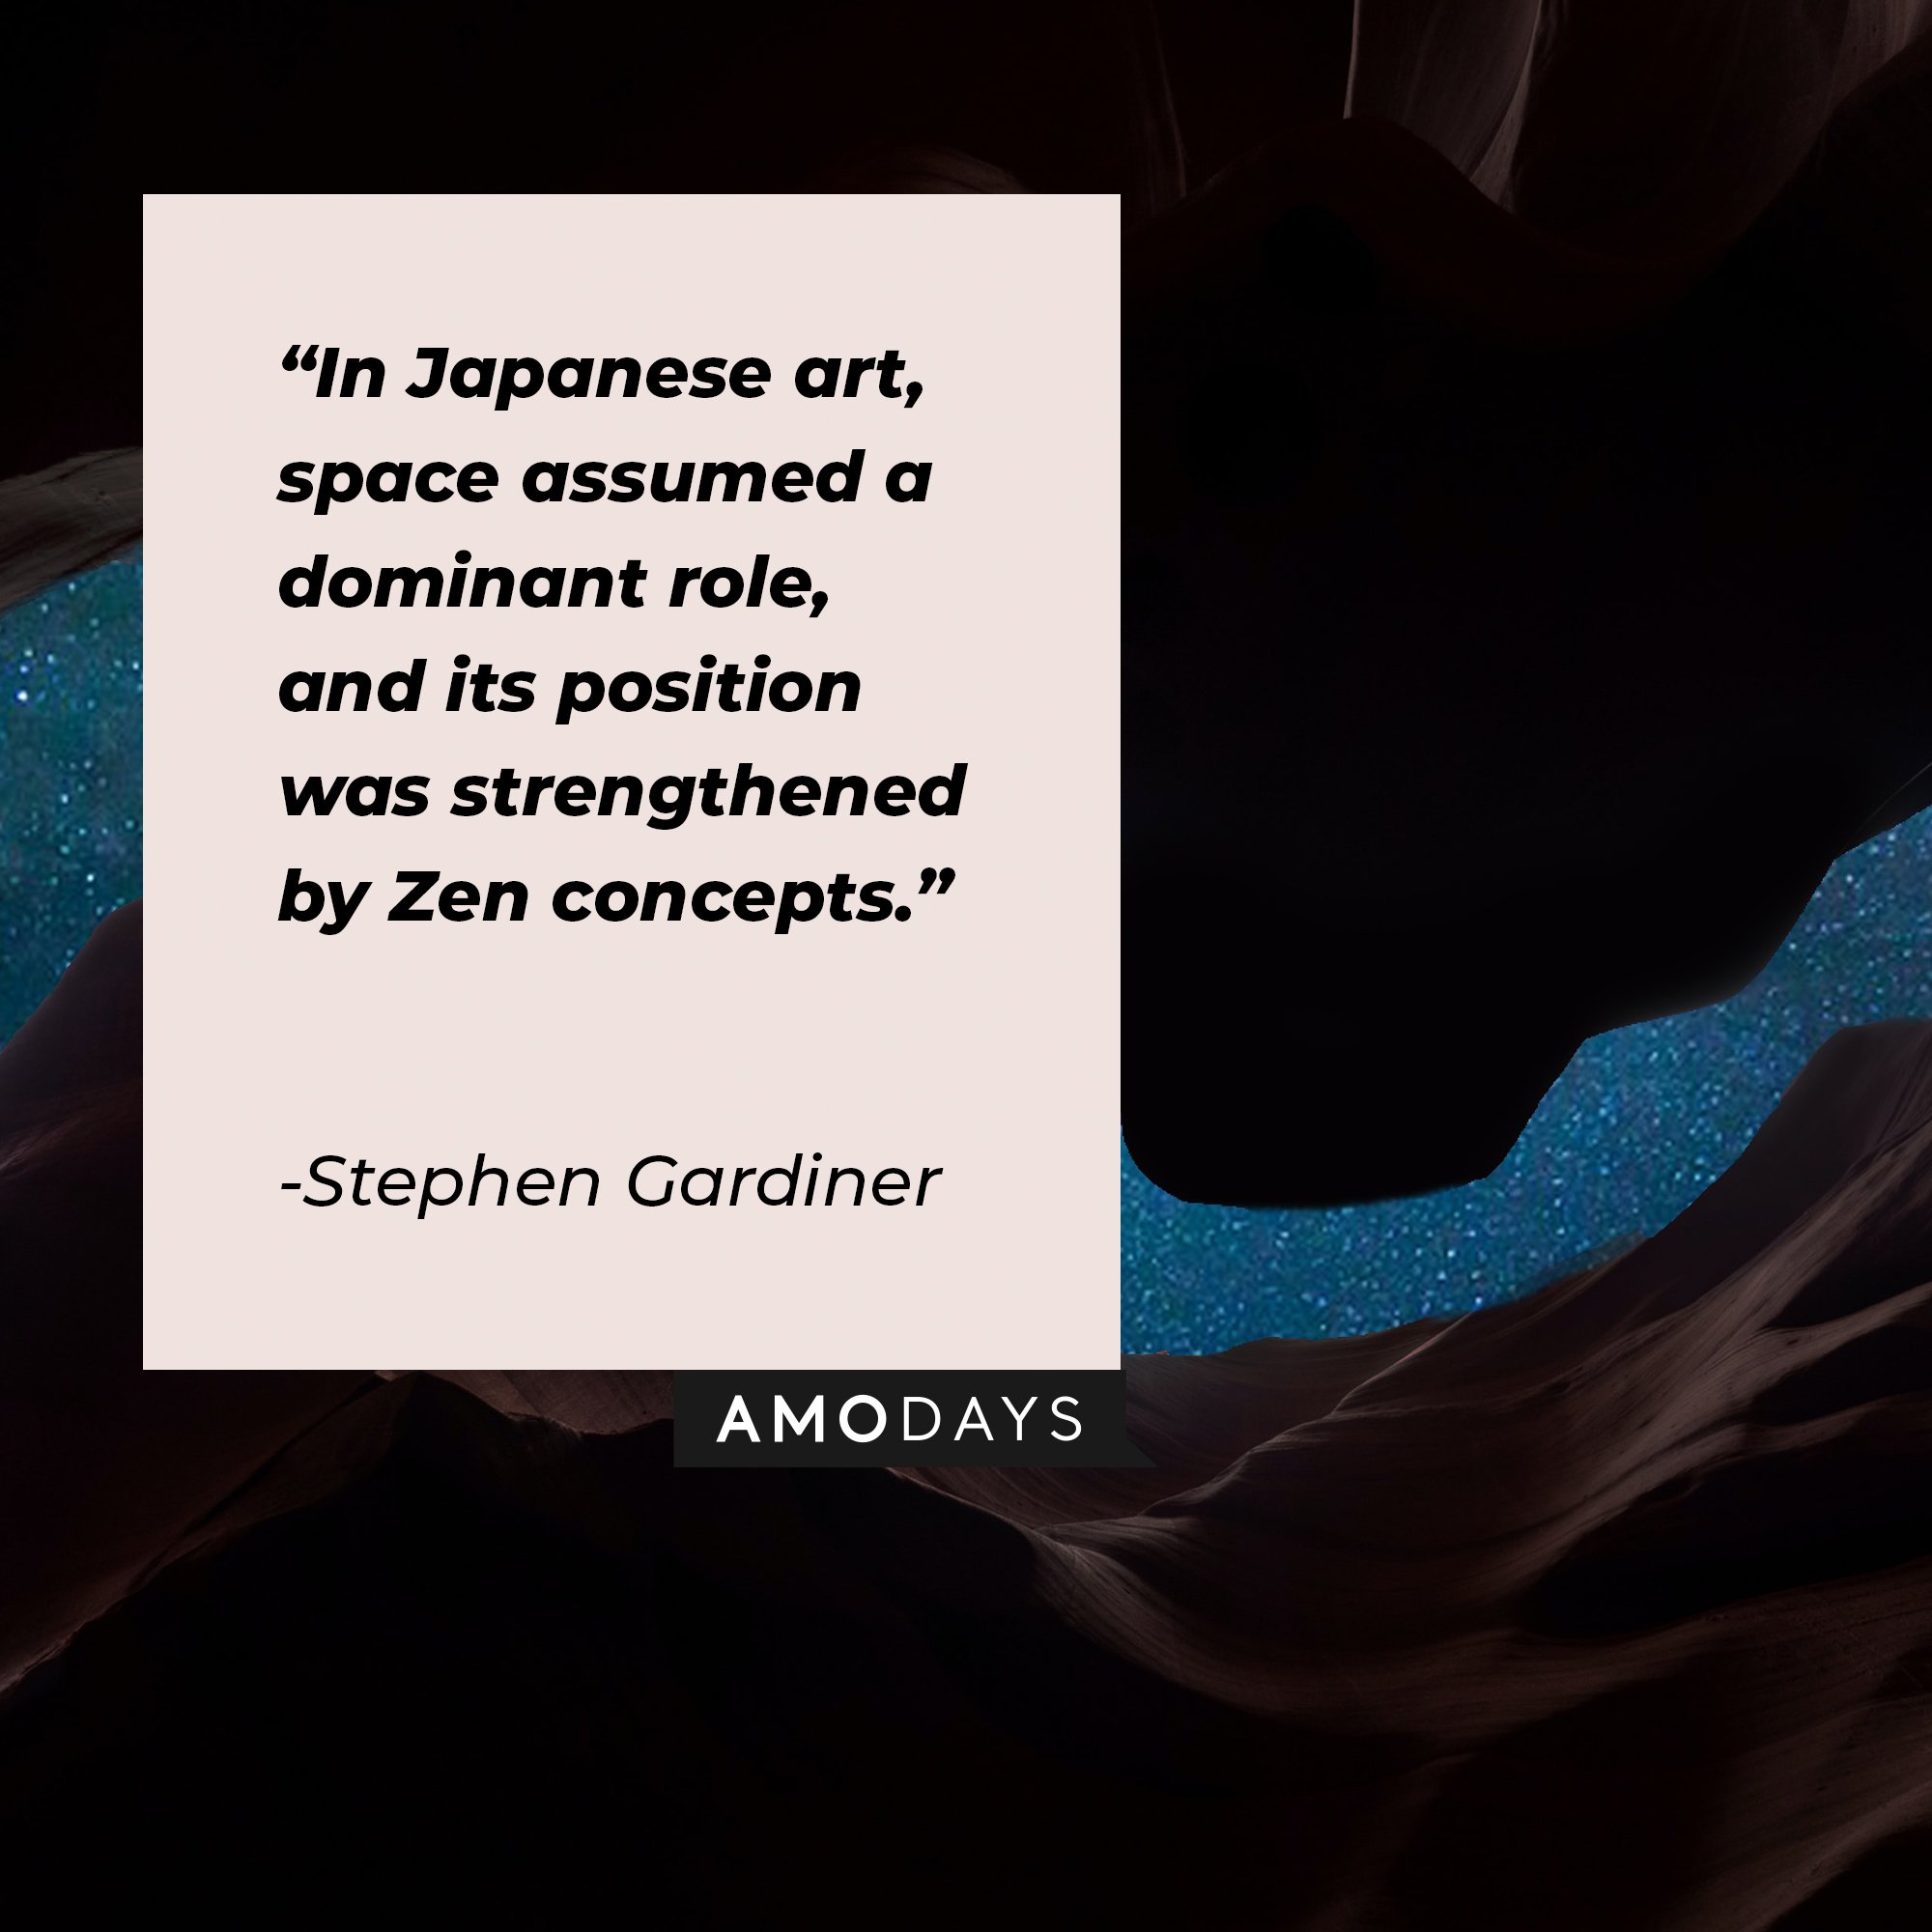 Stephen Gardiner’s quote: "In Japanese art, space assumed a dominant role, and its position was strengthened by Zen concepts." | Image: AmoDays 